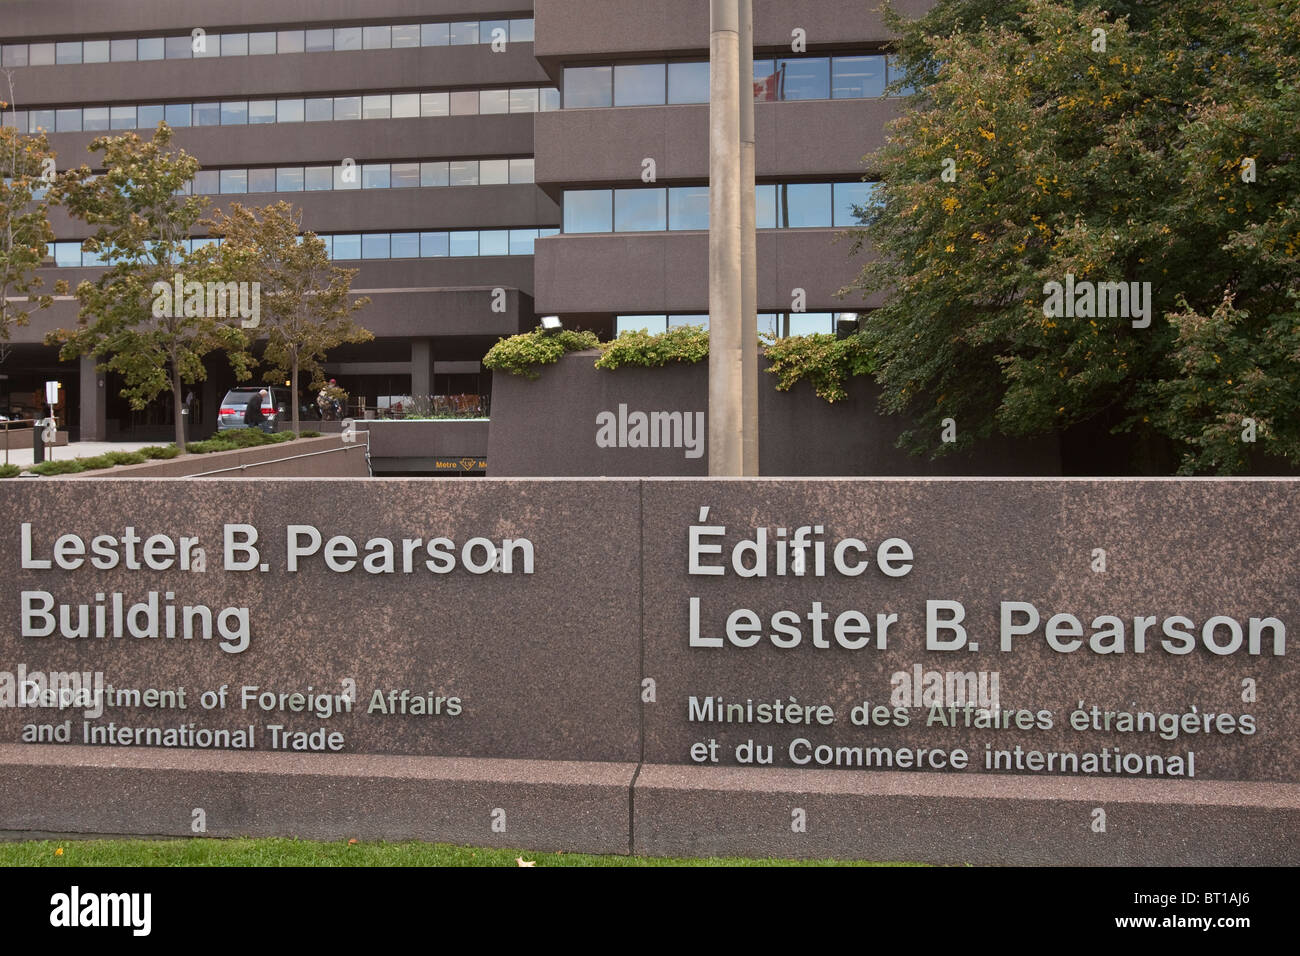 Department of Foreign Affairs and International Trade at the Lester B. Pearson building Stock Photo